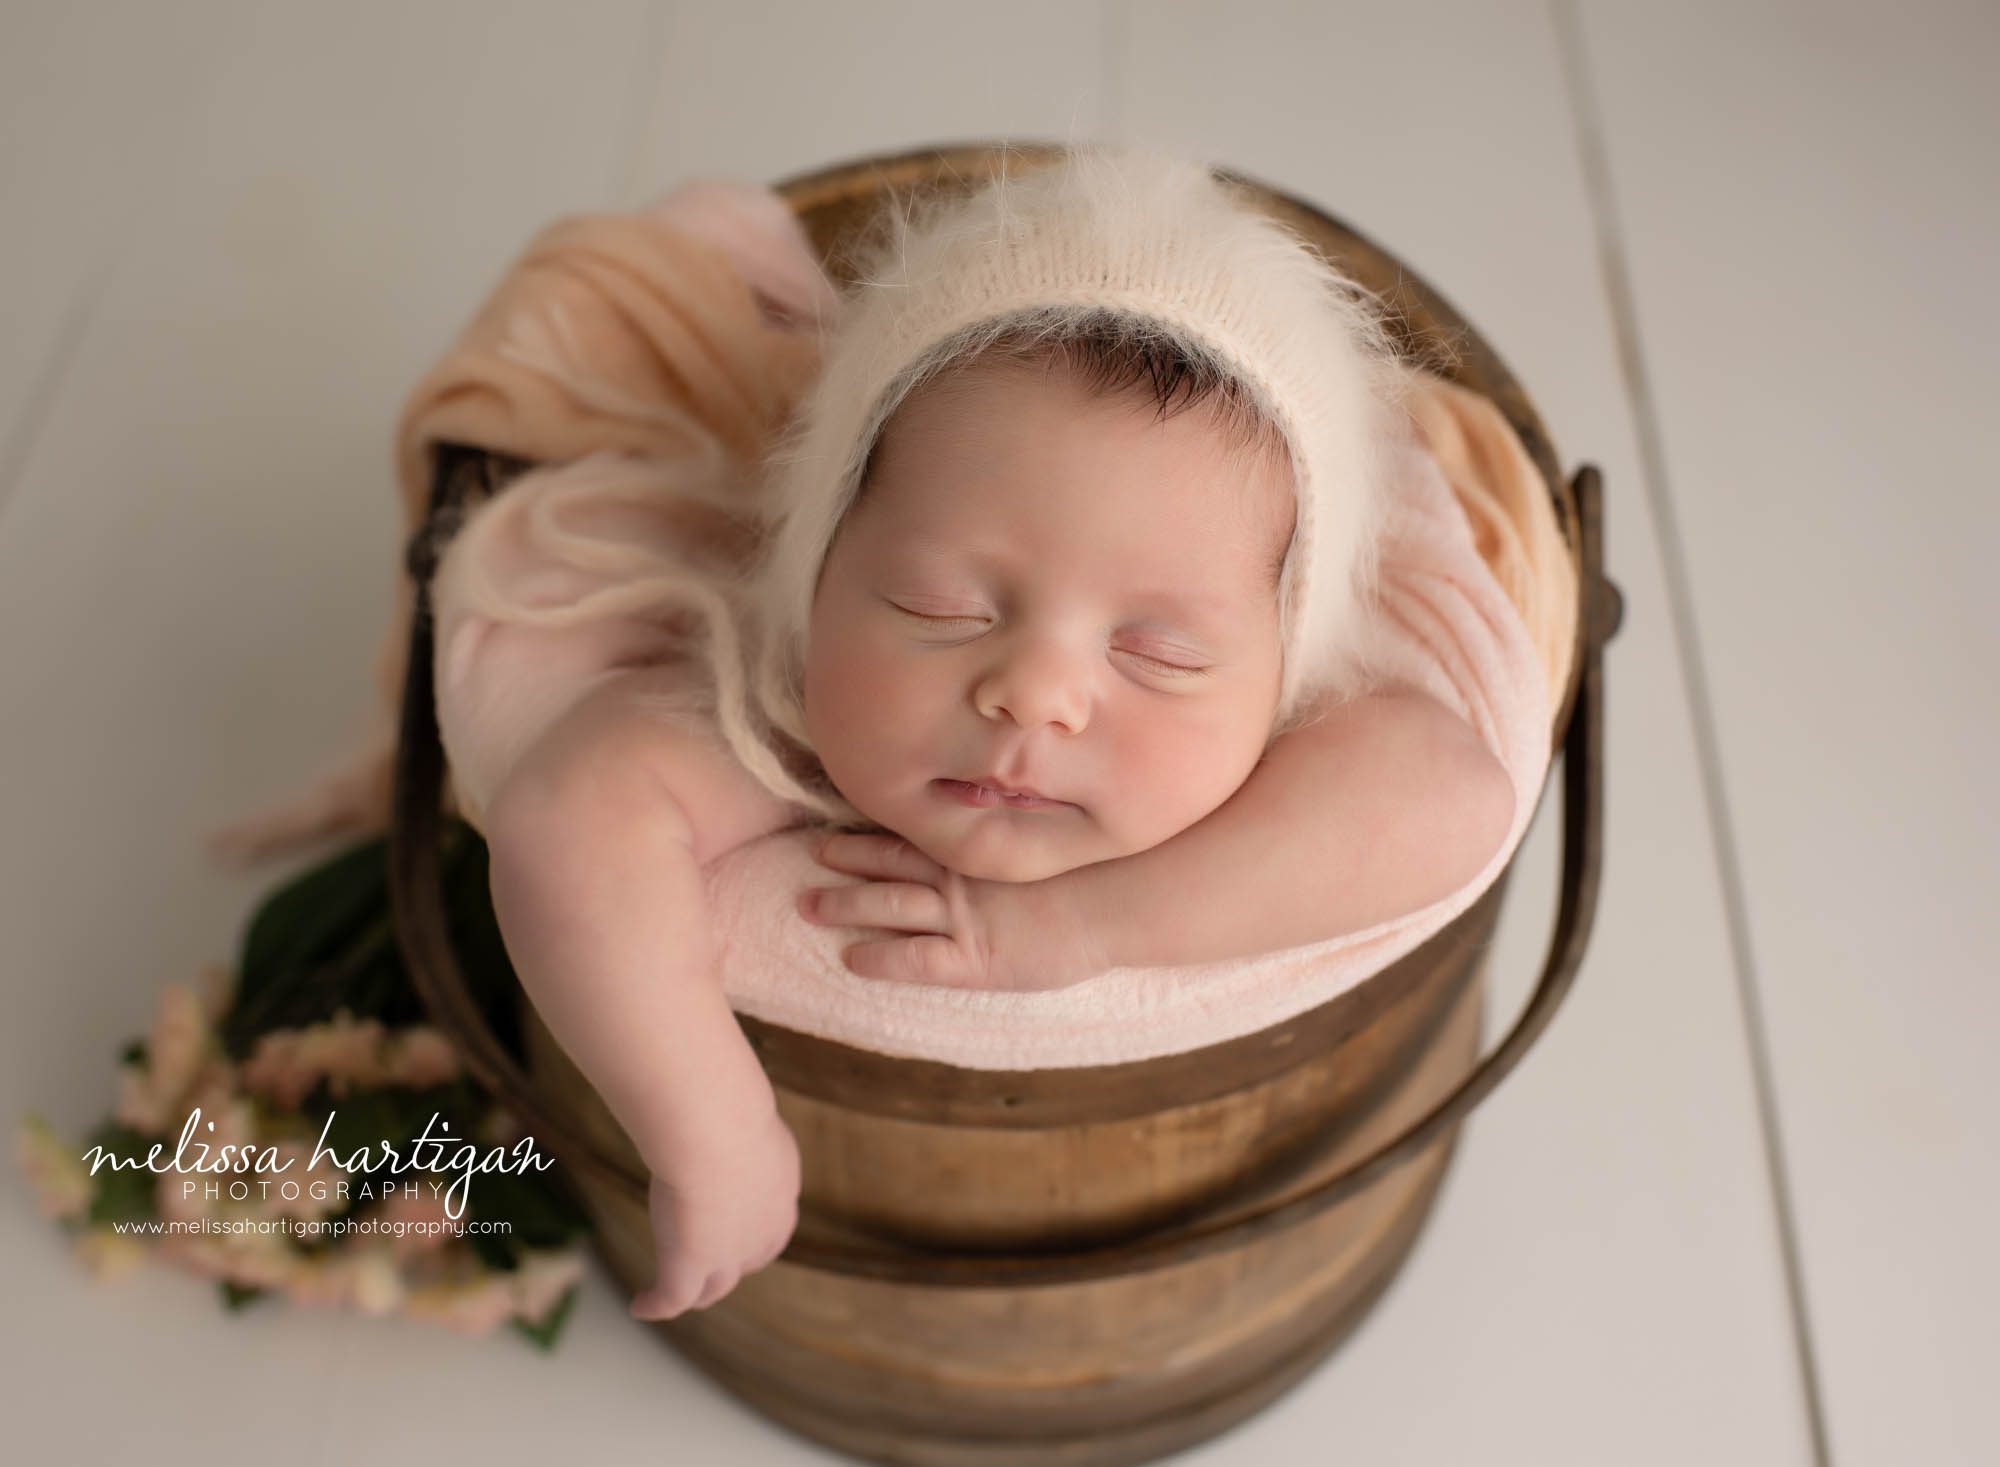 Baby girl posed in wooden bucket with blush pink tones